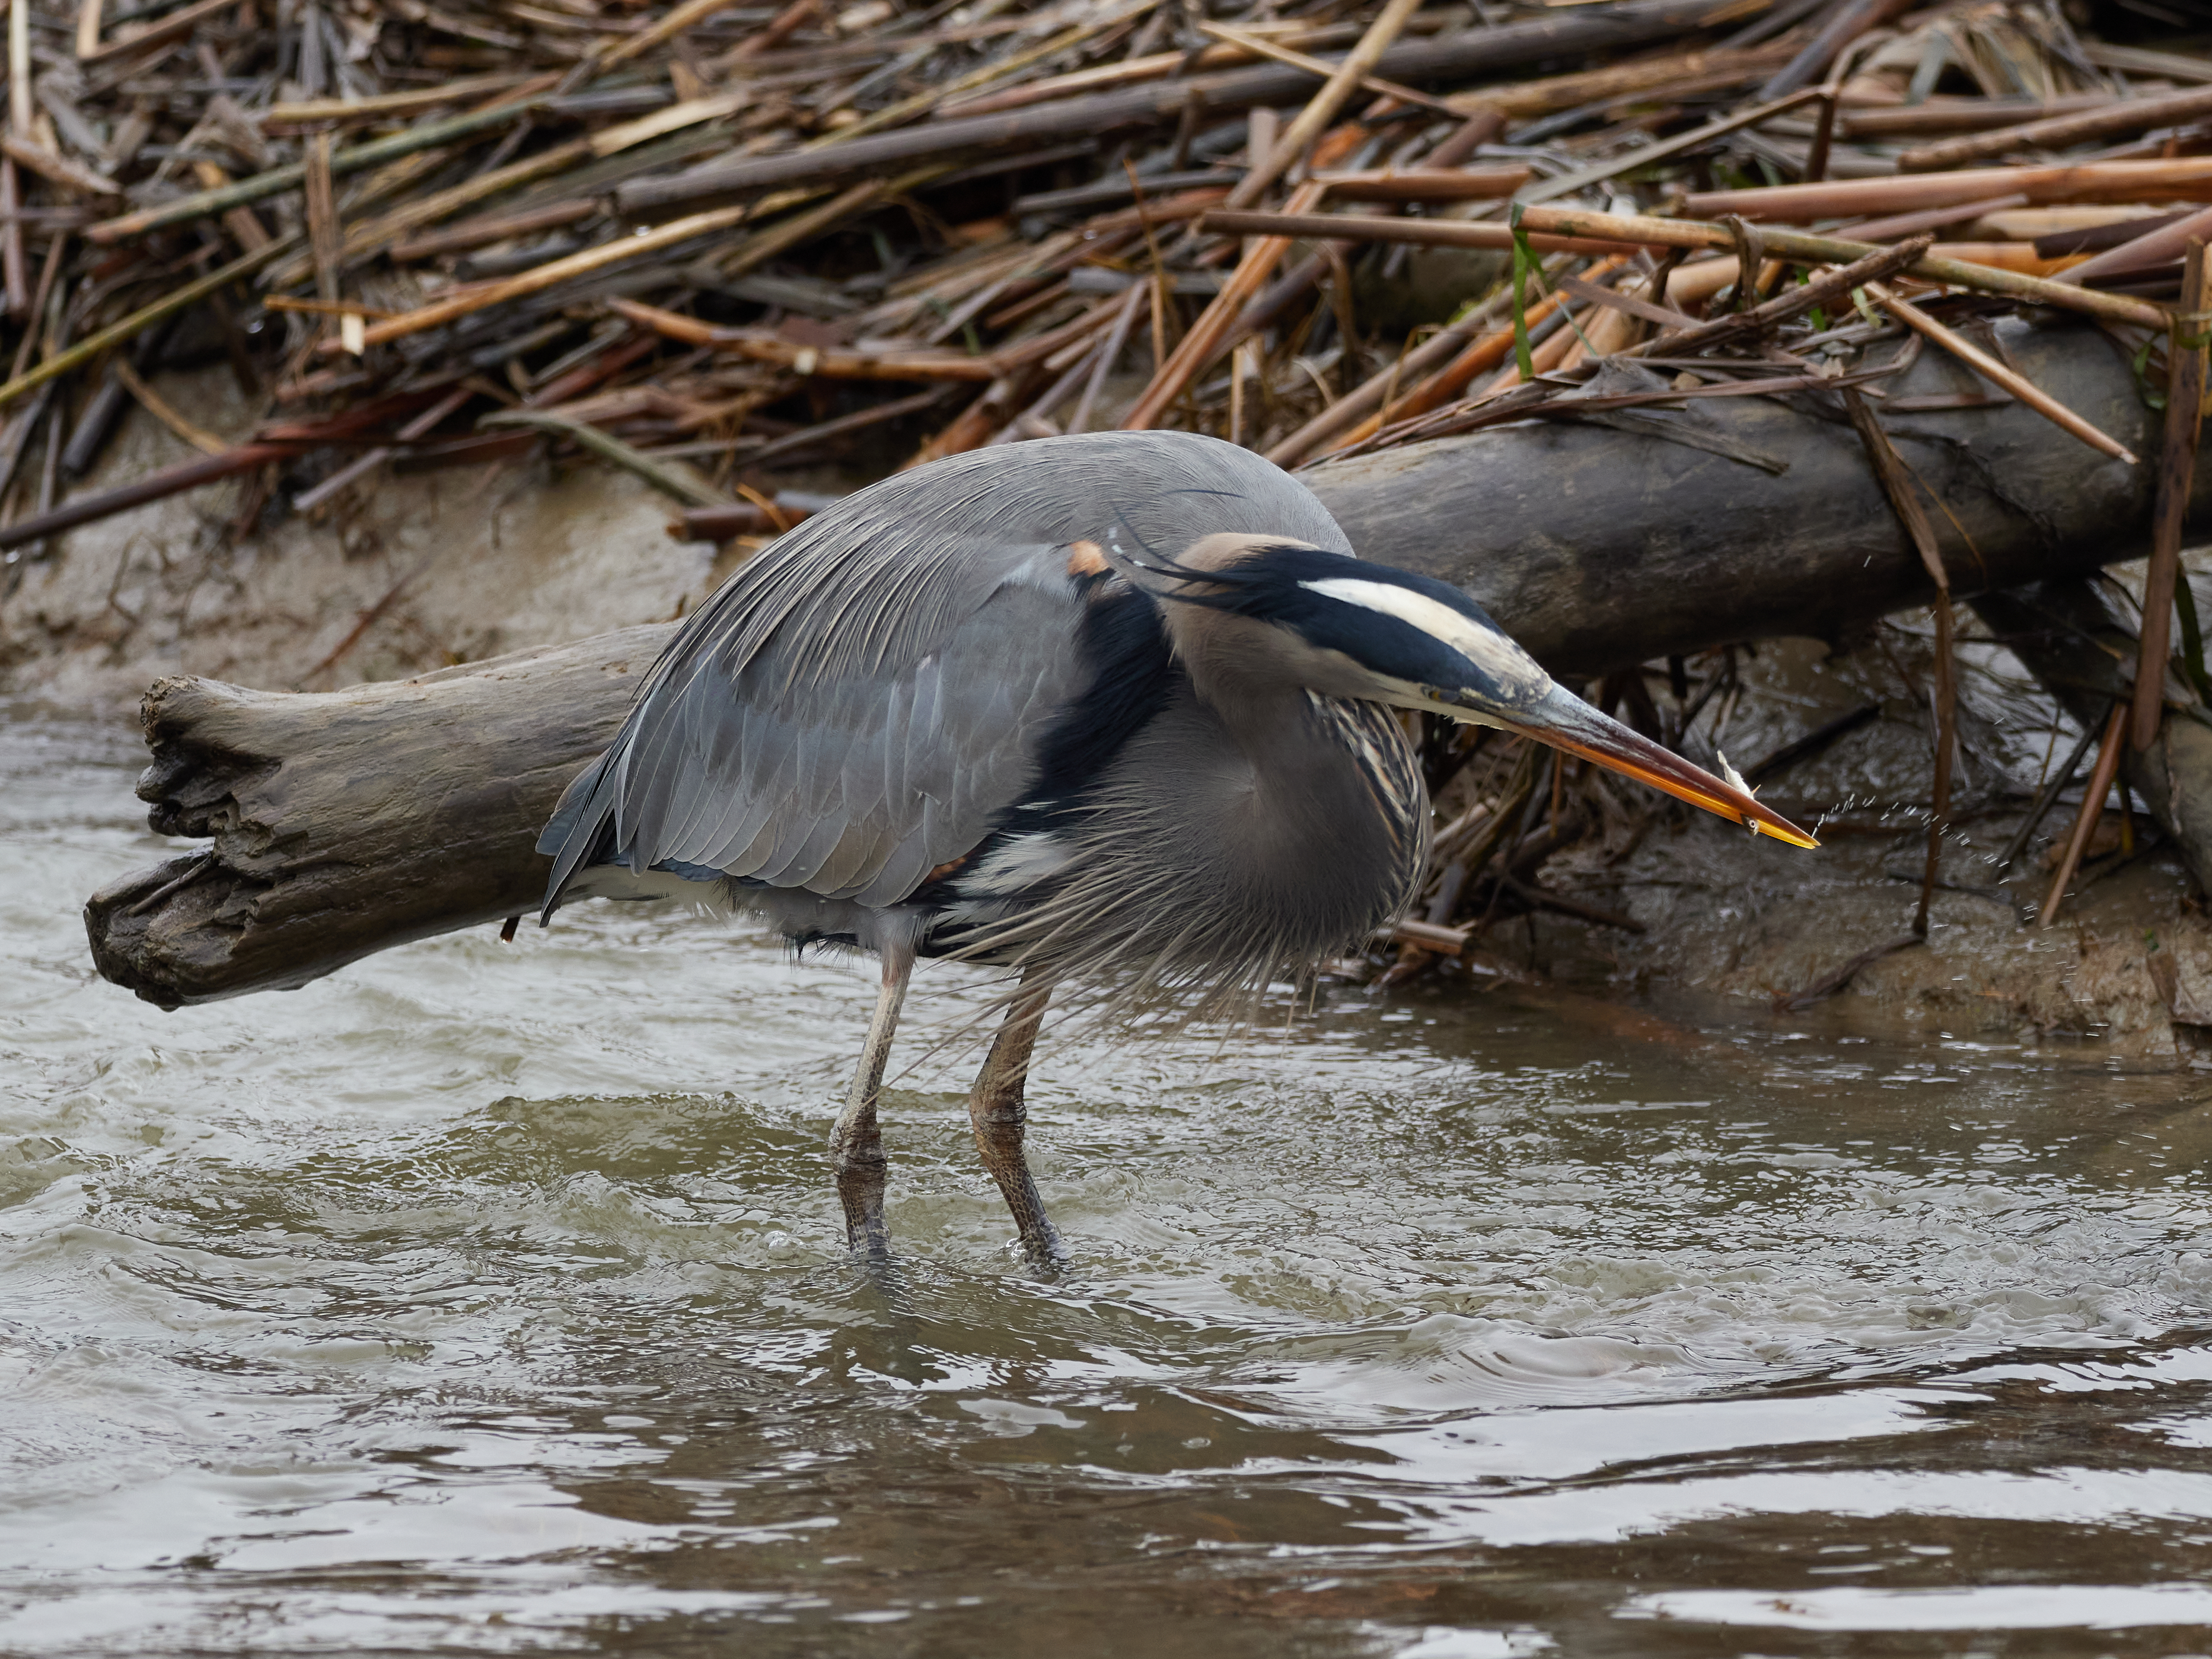 There's something magical about watching the little fishies disappear into the heron's gullet...